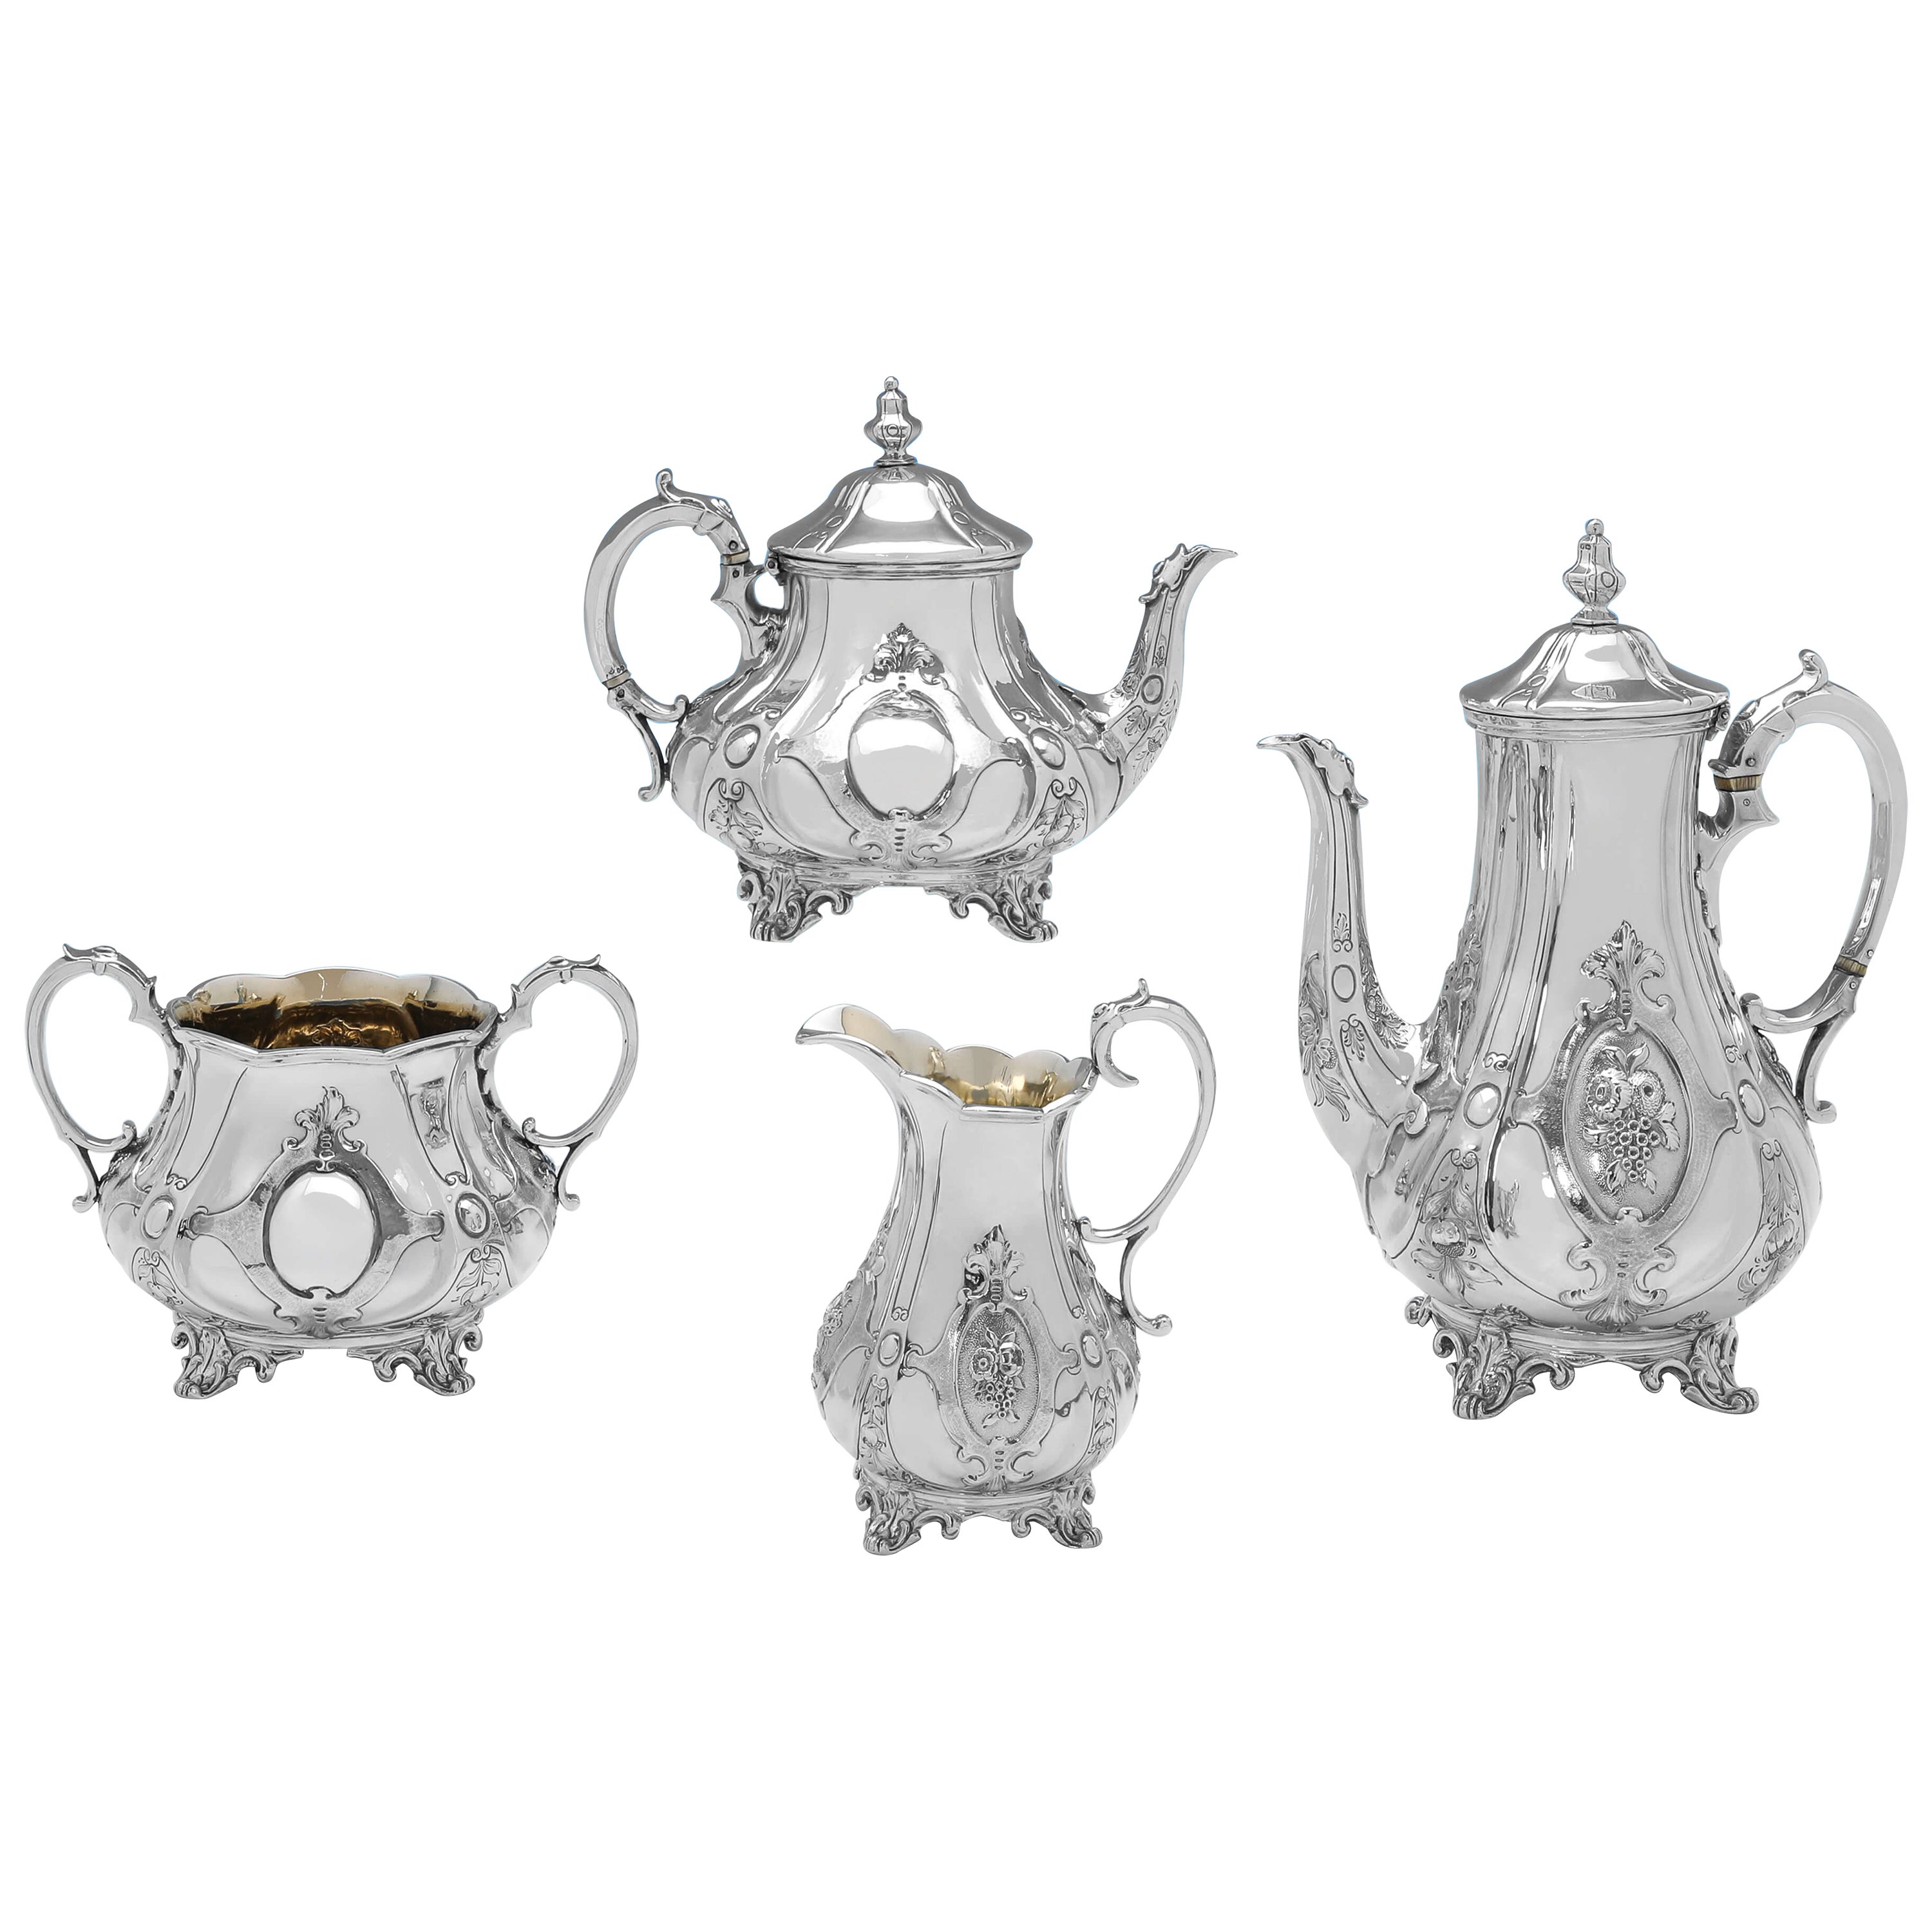 Stunning Victorian 4 Piece Sterling Silver Tea Set - Made in London in 1853